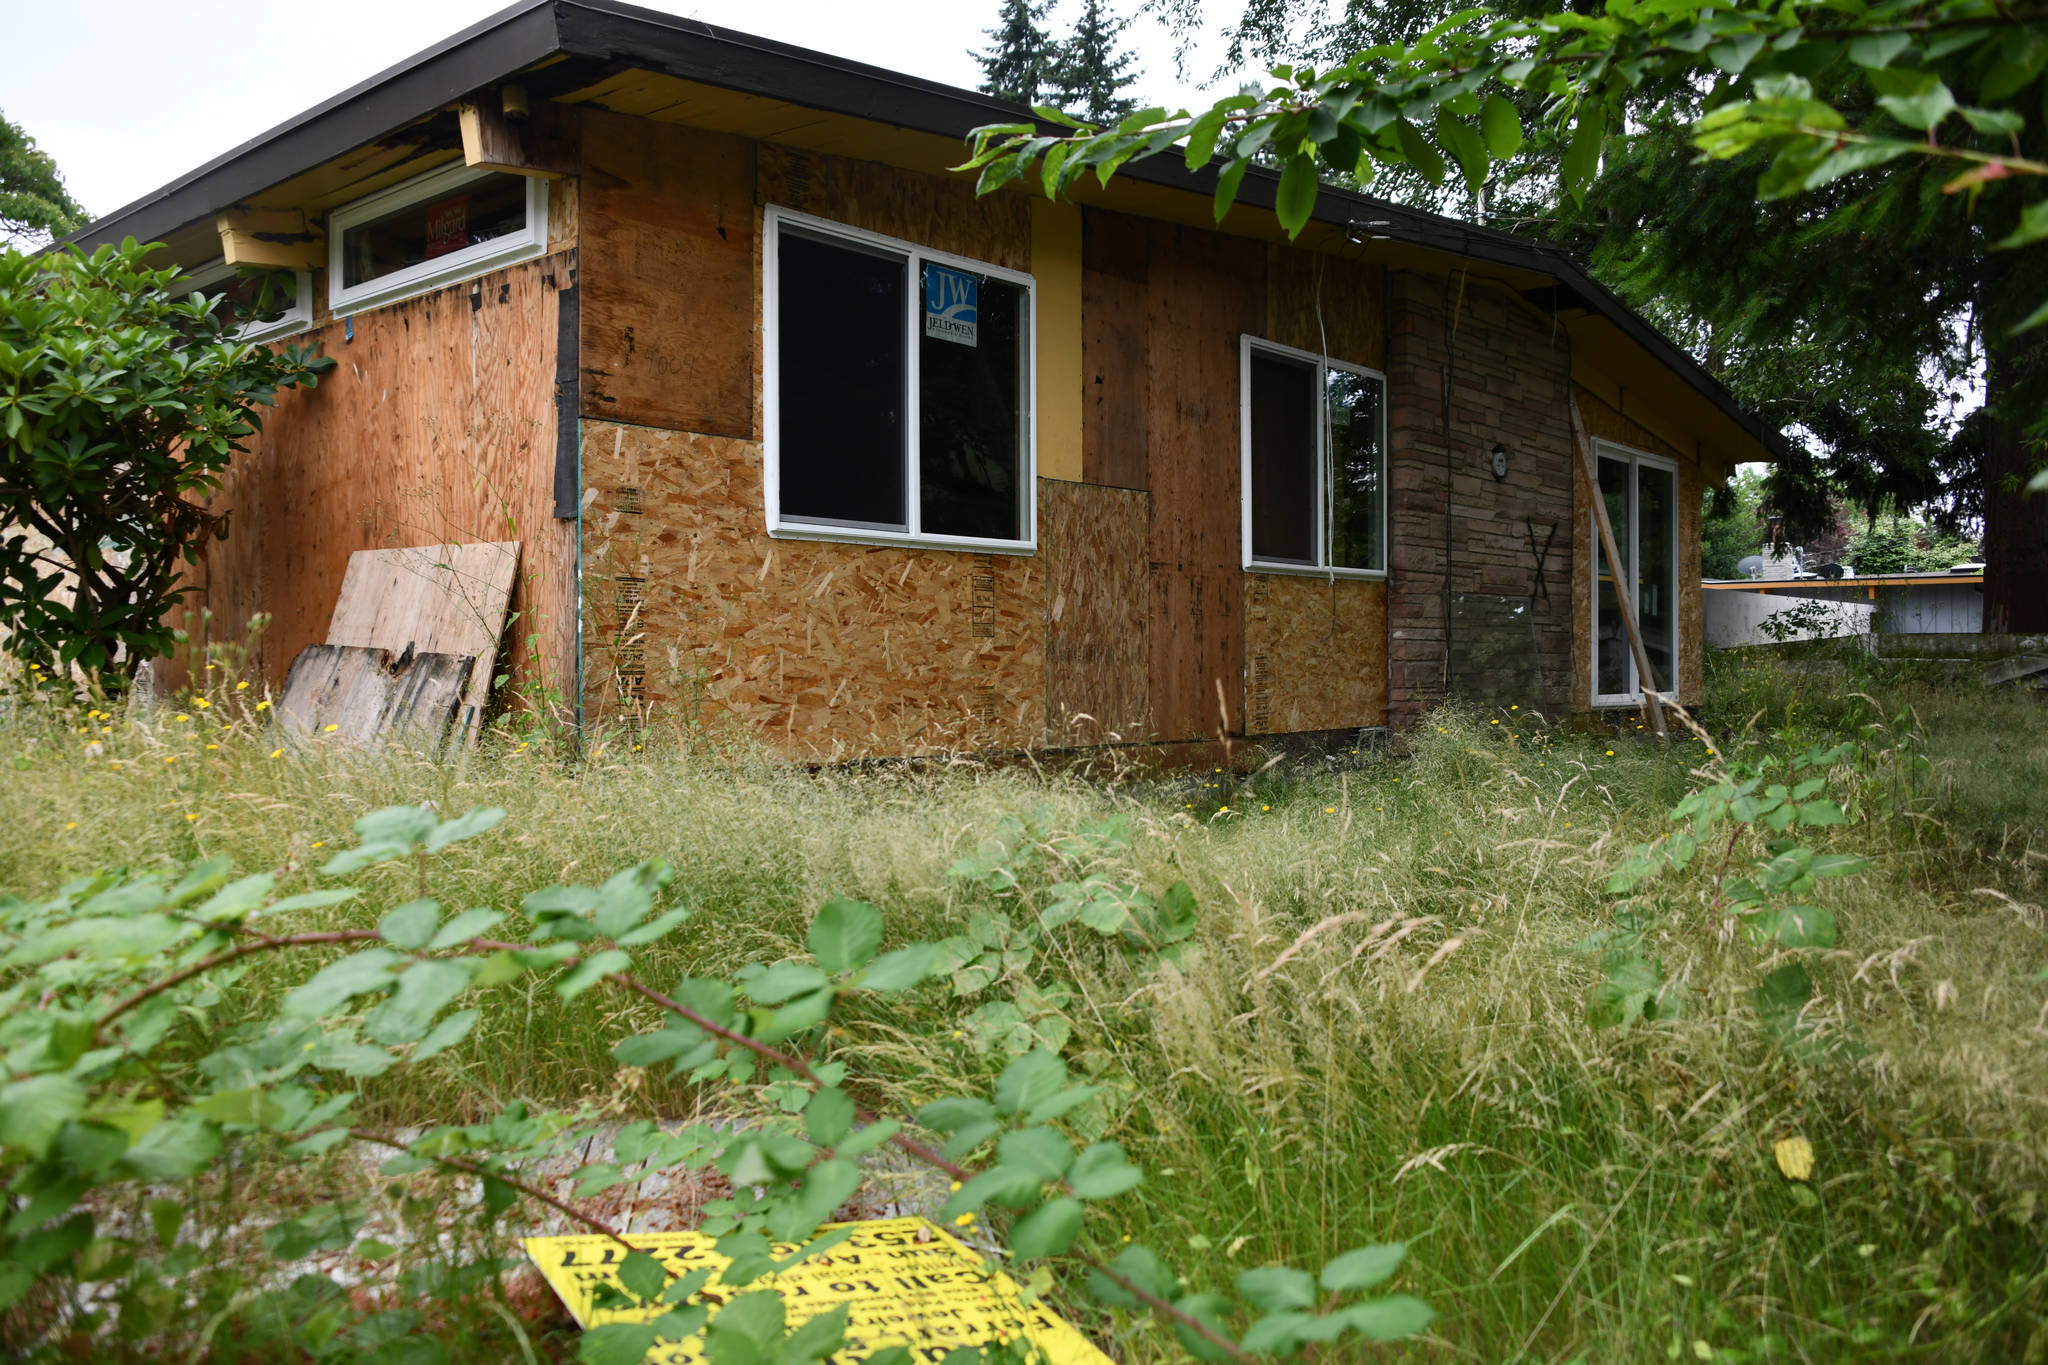 Mercer Island City Council has approved a resolution for the city to purchase the uninhabitable property at the busy intersection of Southeast 40th Street and Island Crest Way. Andy Nystrom/ staff photo